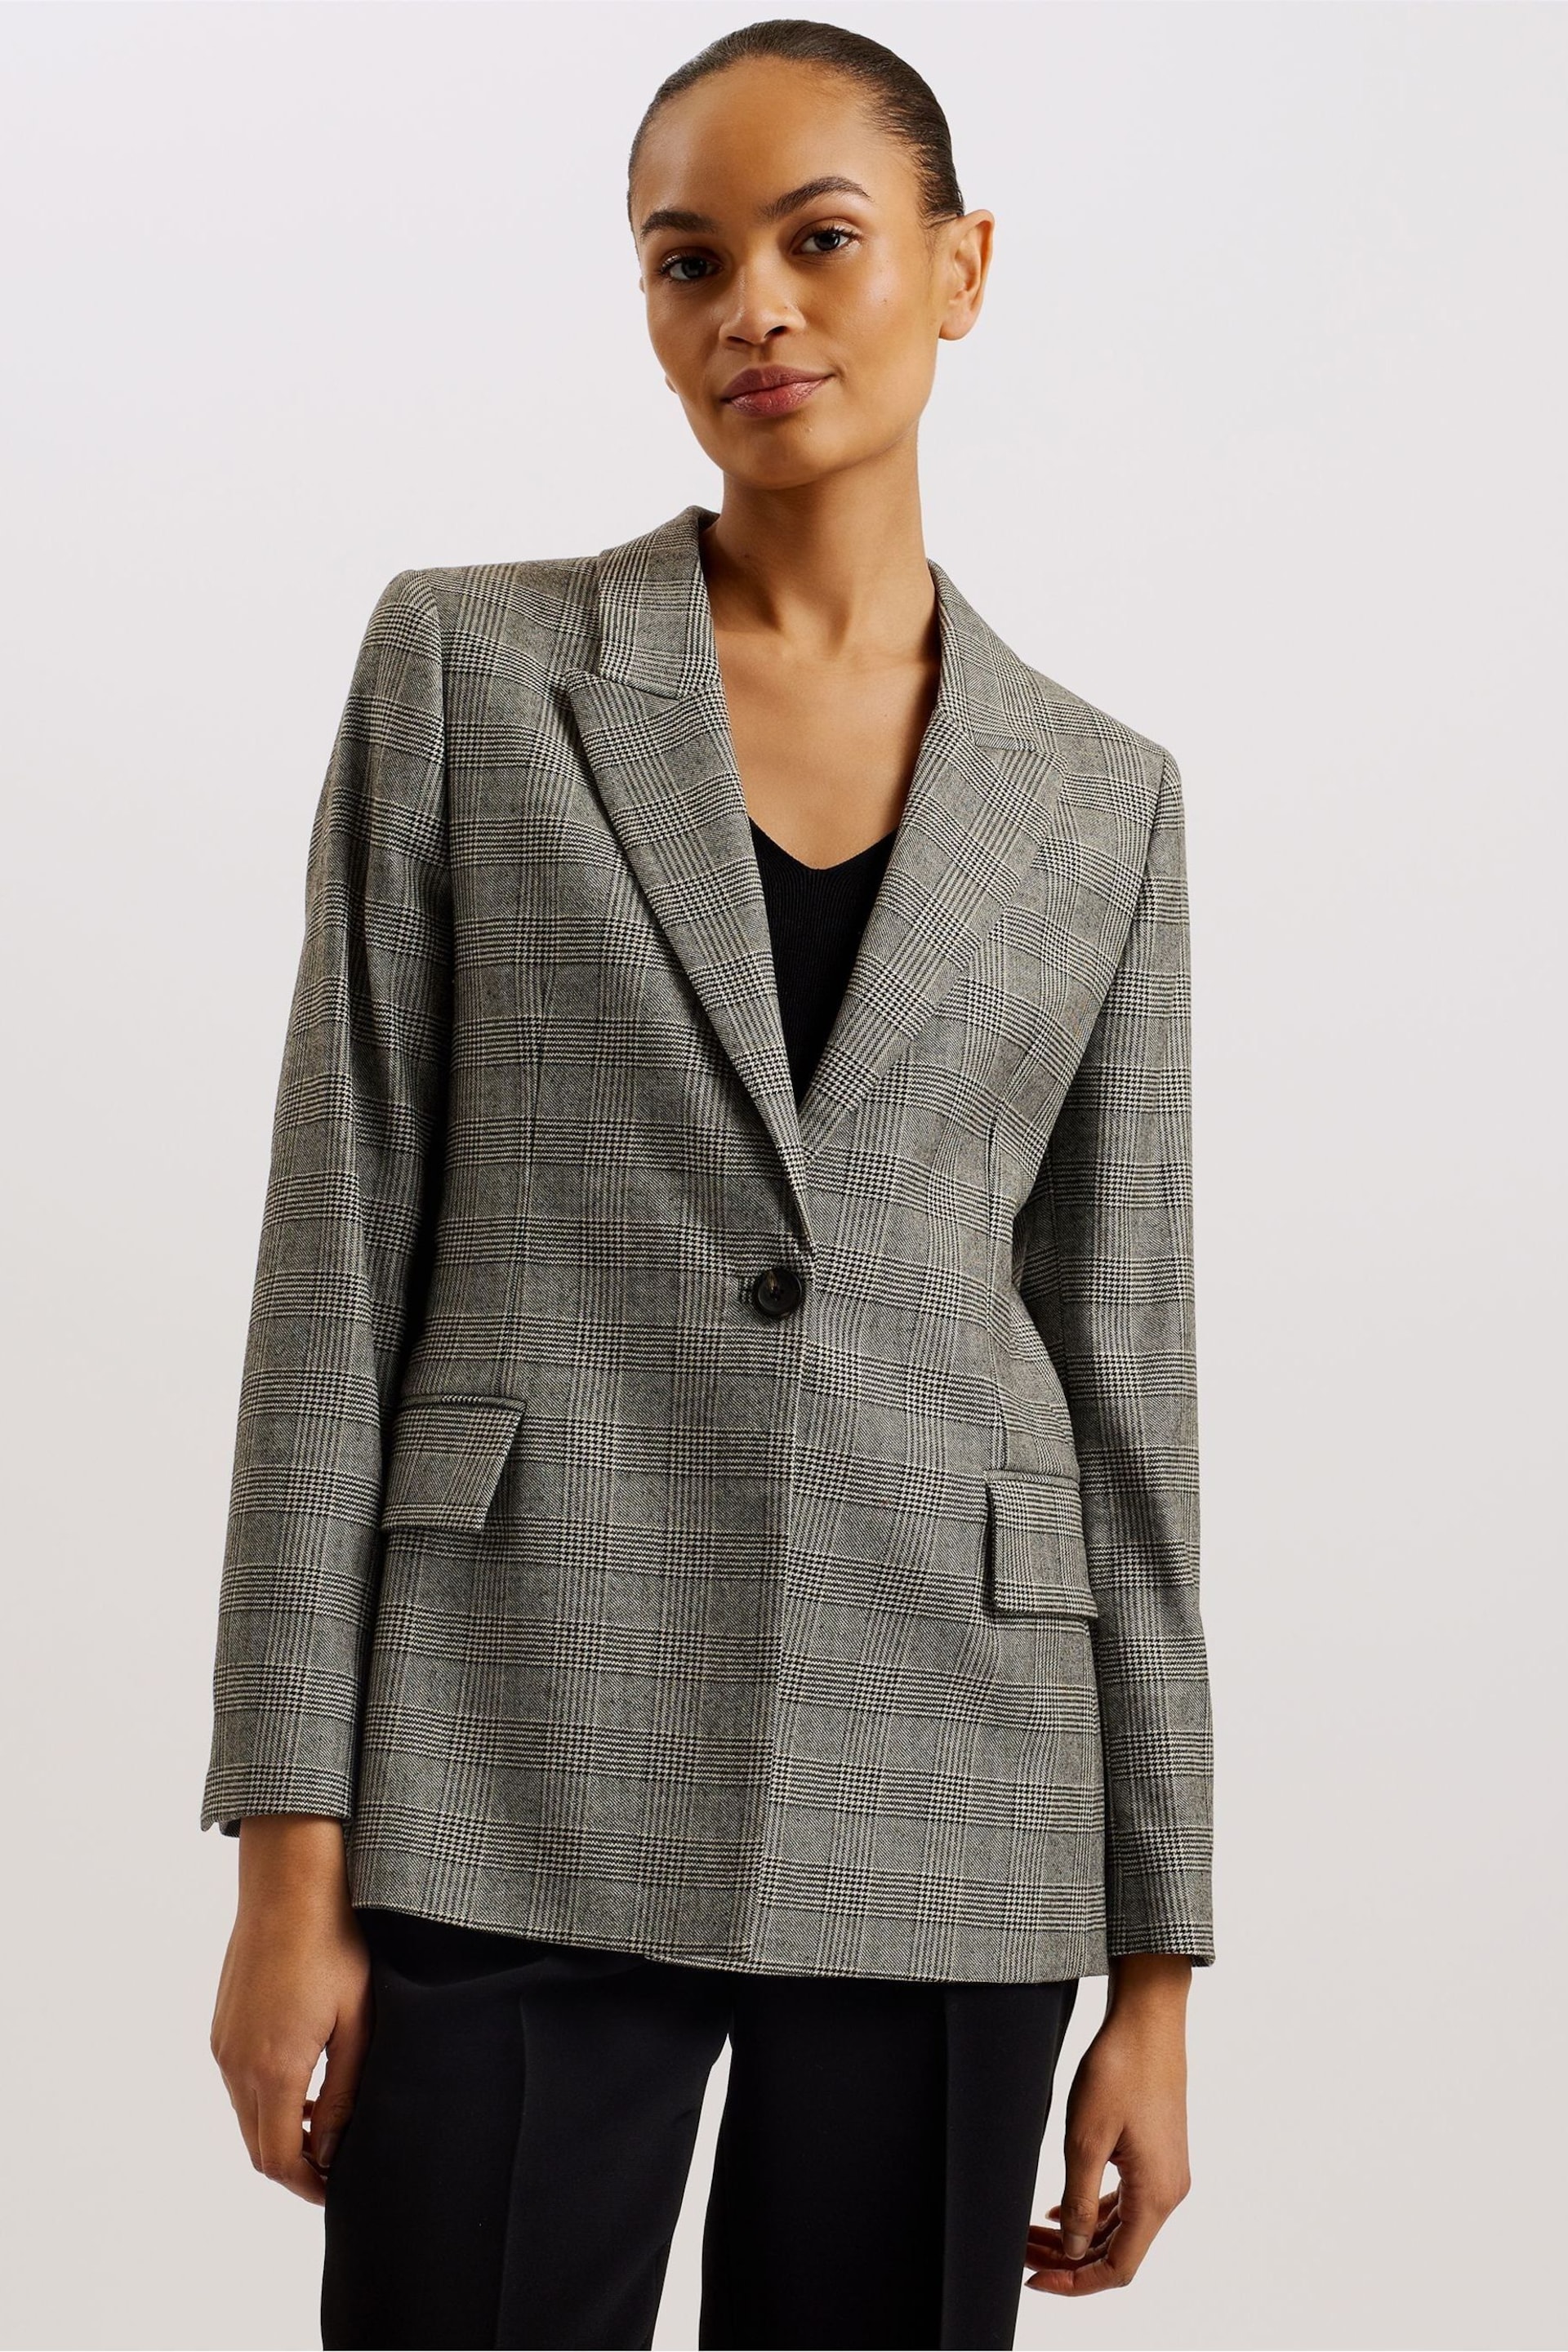 Ted Baker Grey Jommia Relaxed Fit Blazer - Image 1 of 6